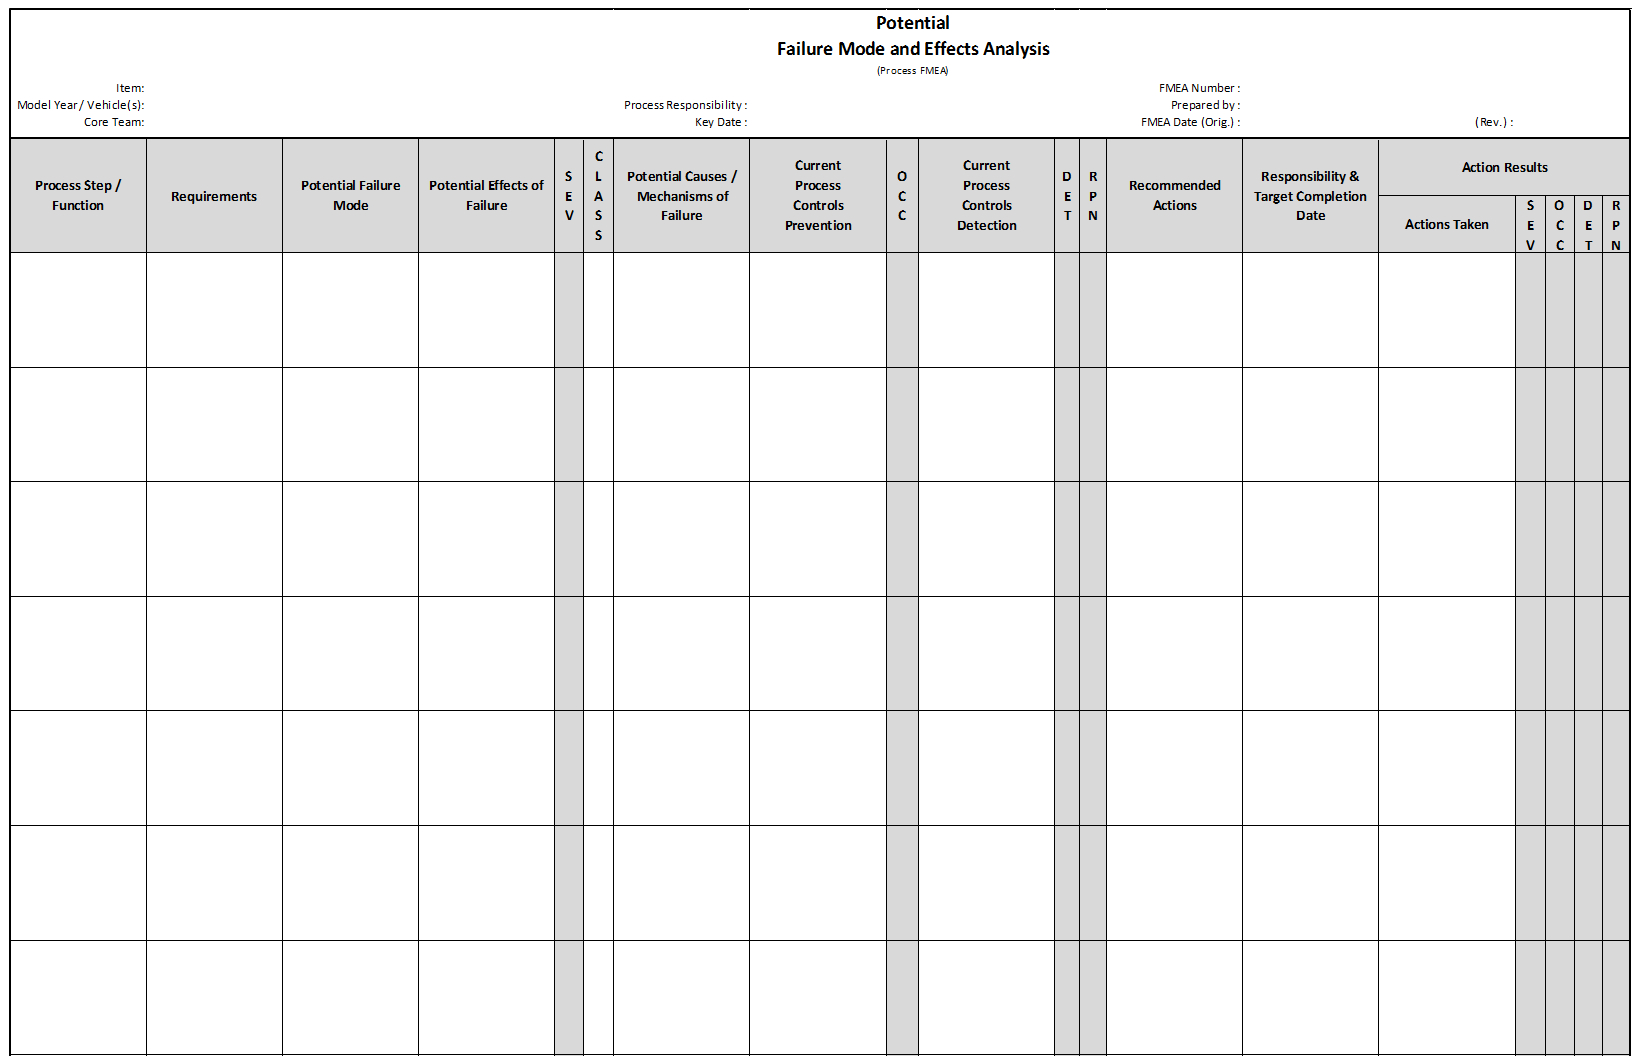 Fmea | Failure Mode And Effects Analysis | Quality One In Failure Analysis Report Template